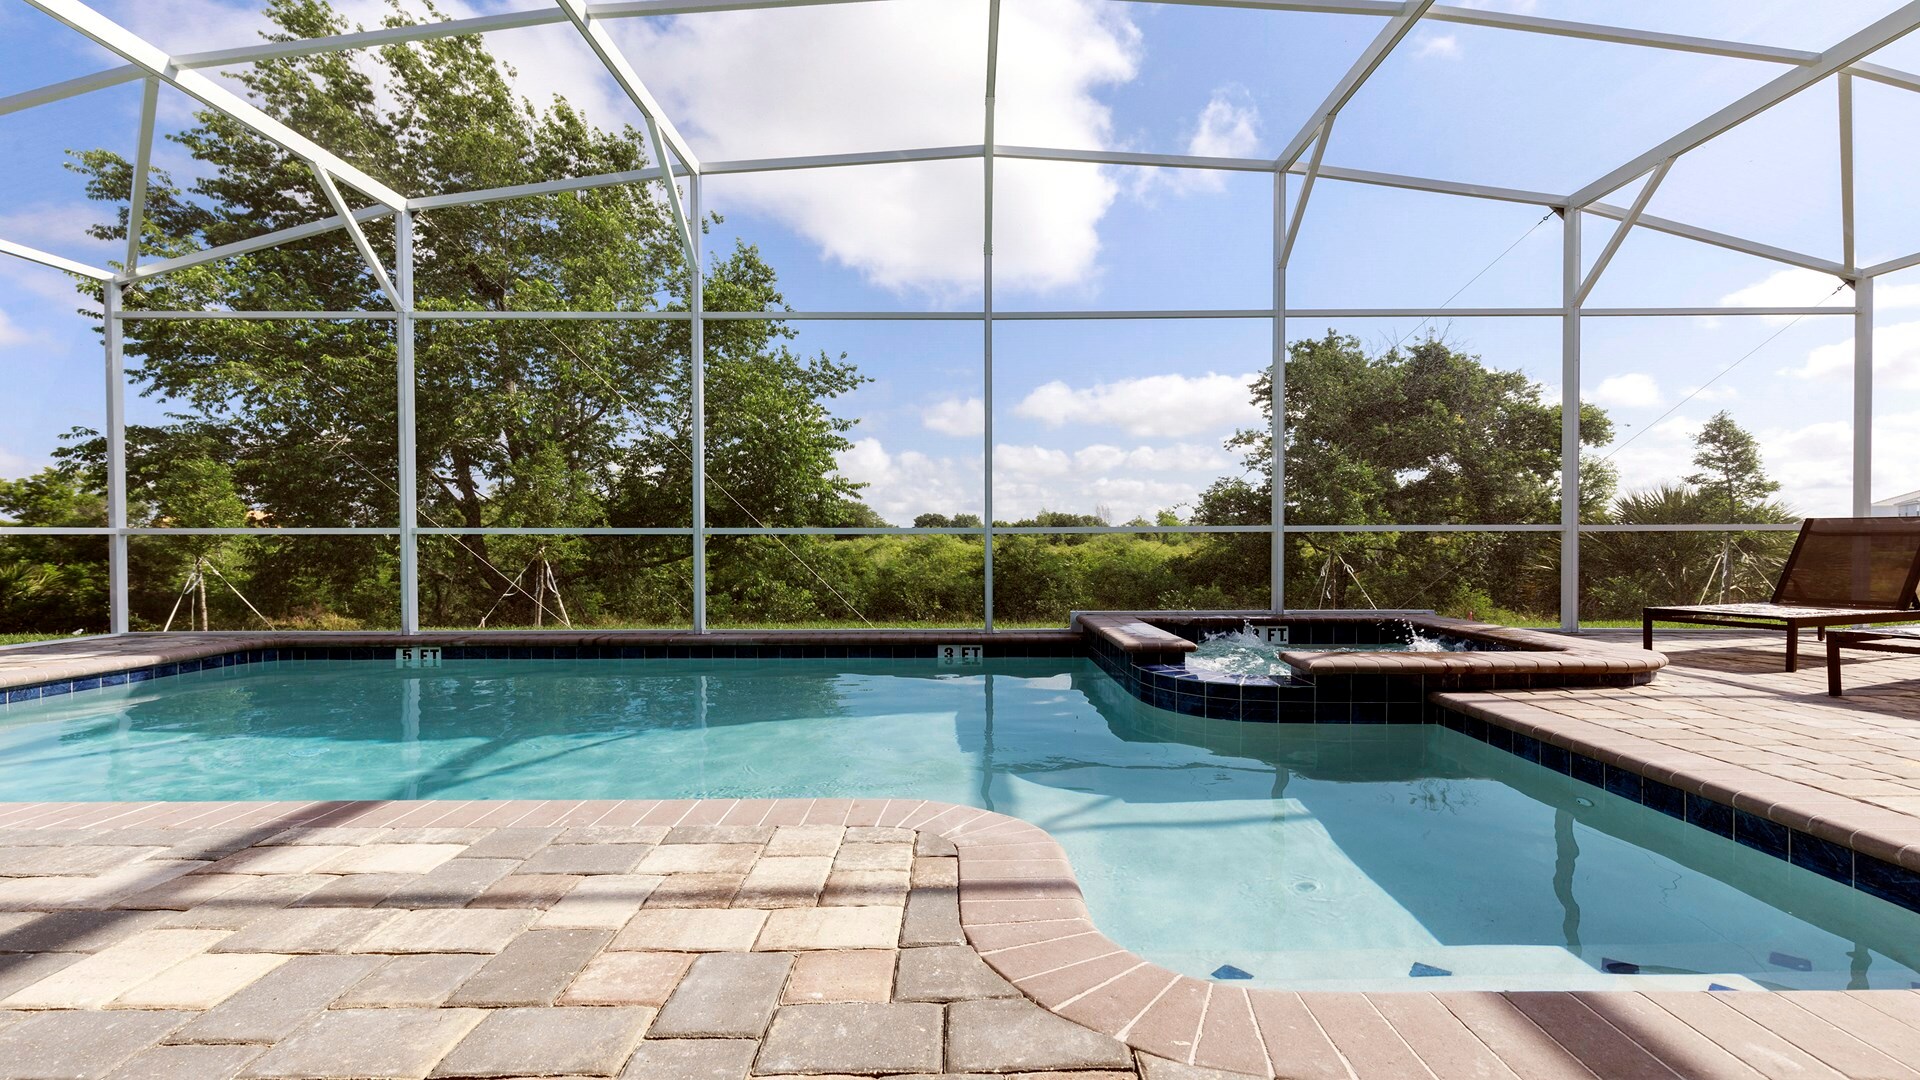 Enjoy stunning views out on to the green from your own private pool